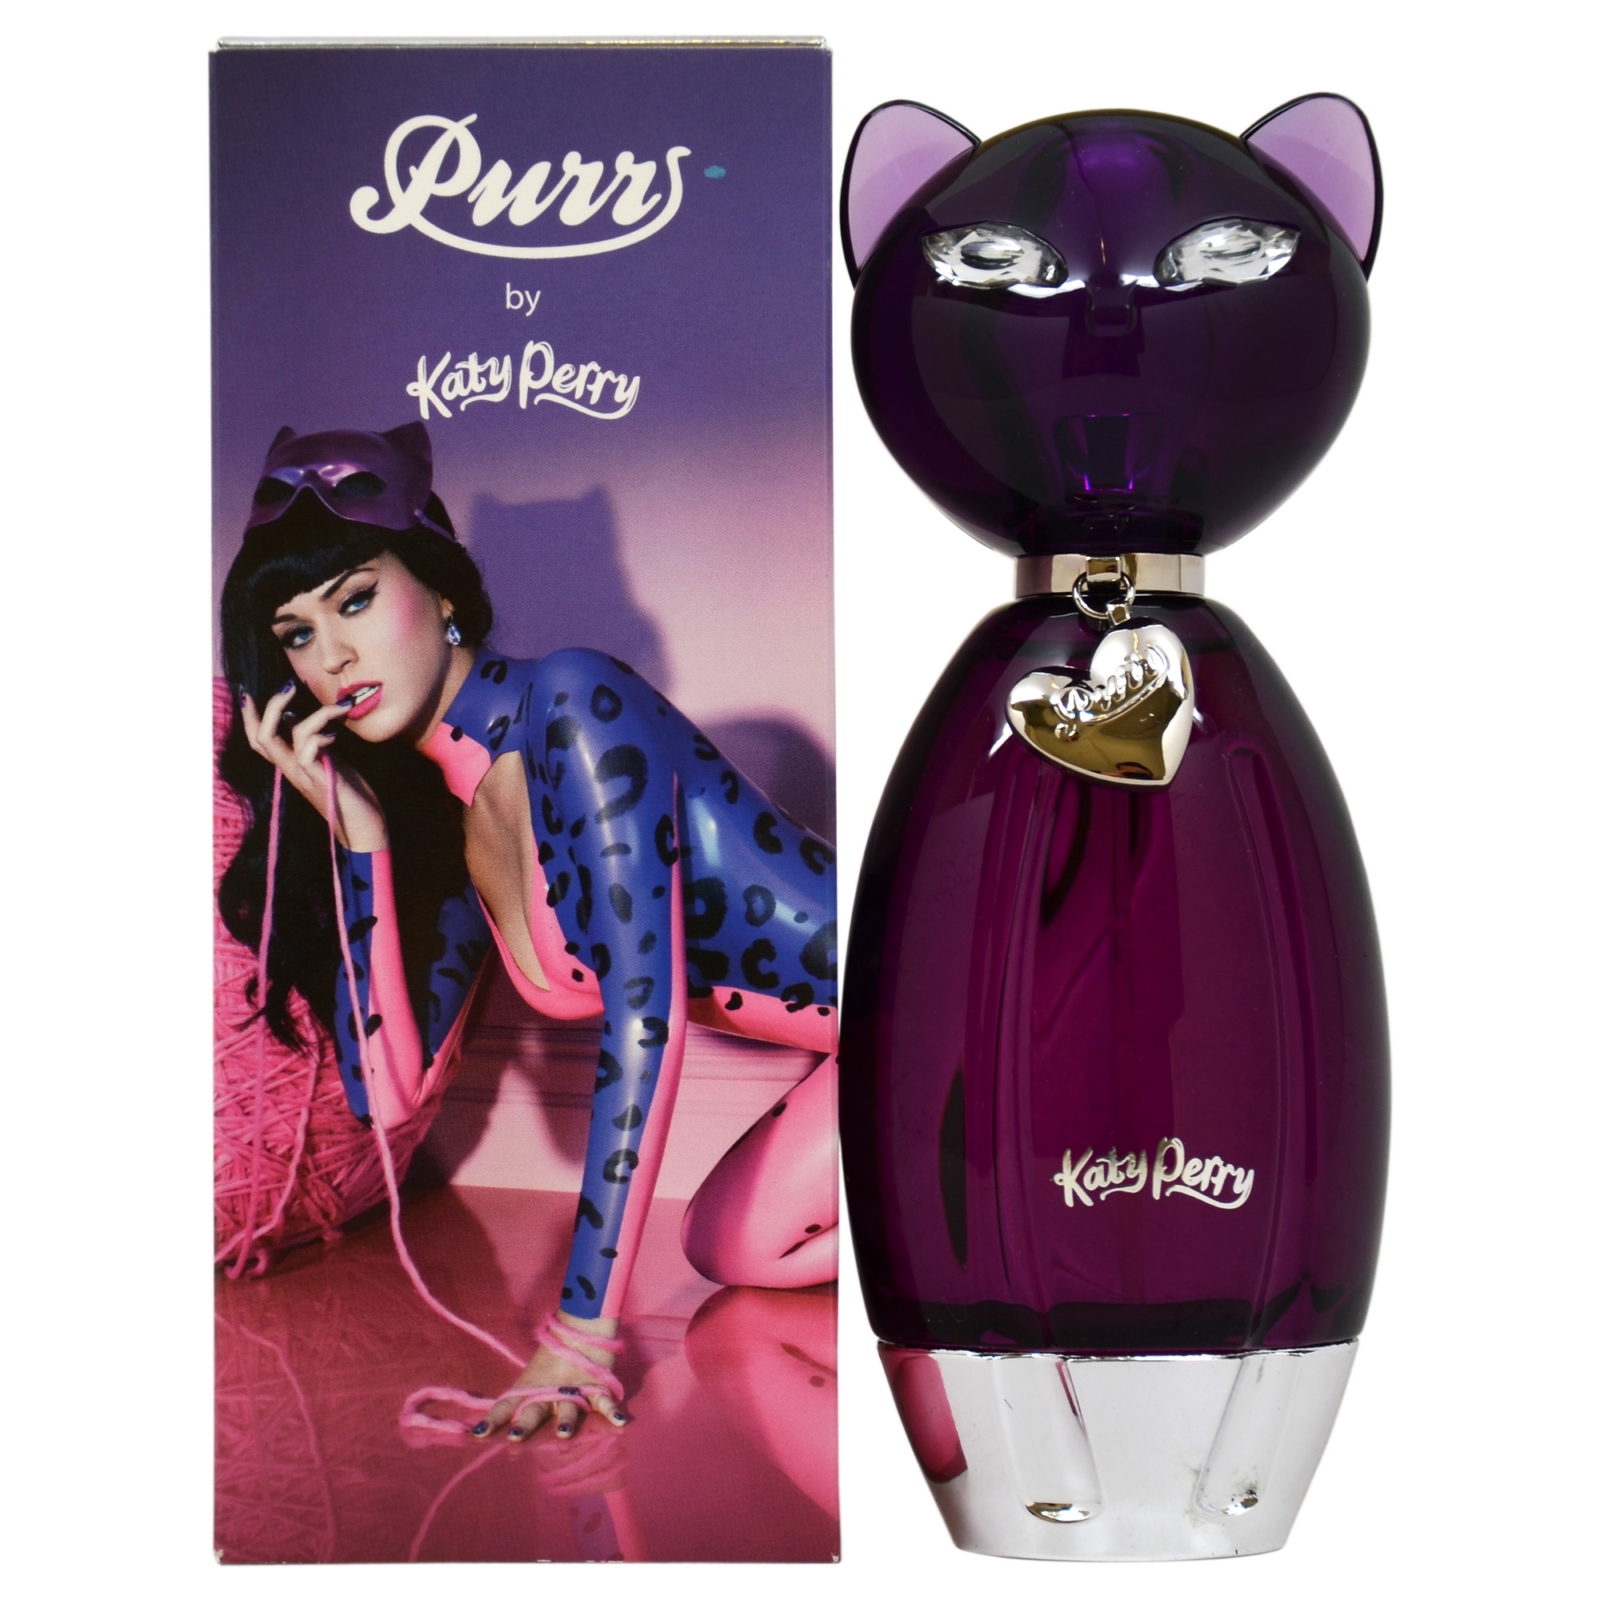 Katy Perry Purr by  for Women - 3.4 oz EDP Spray